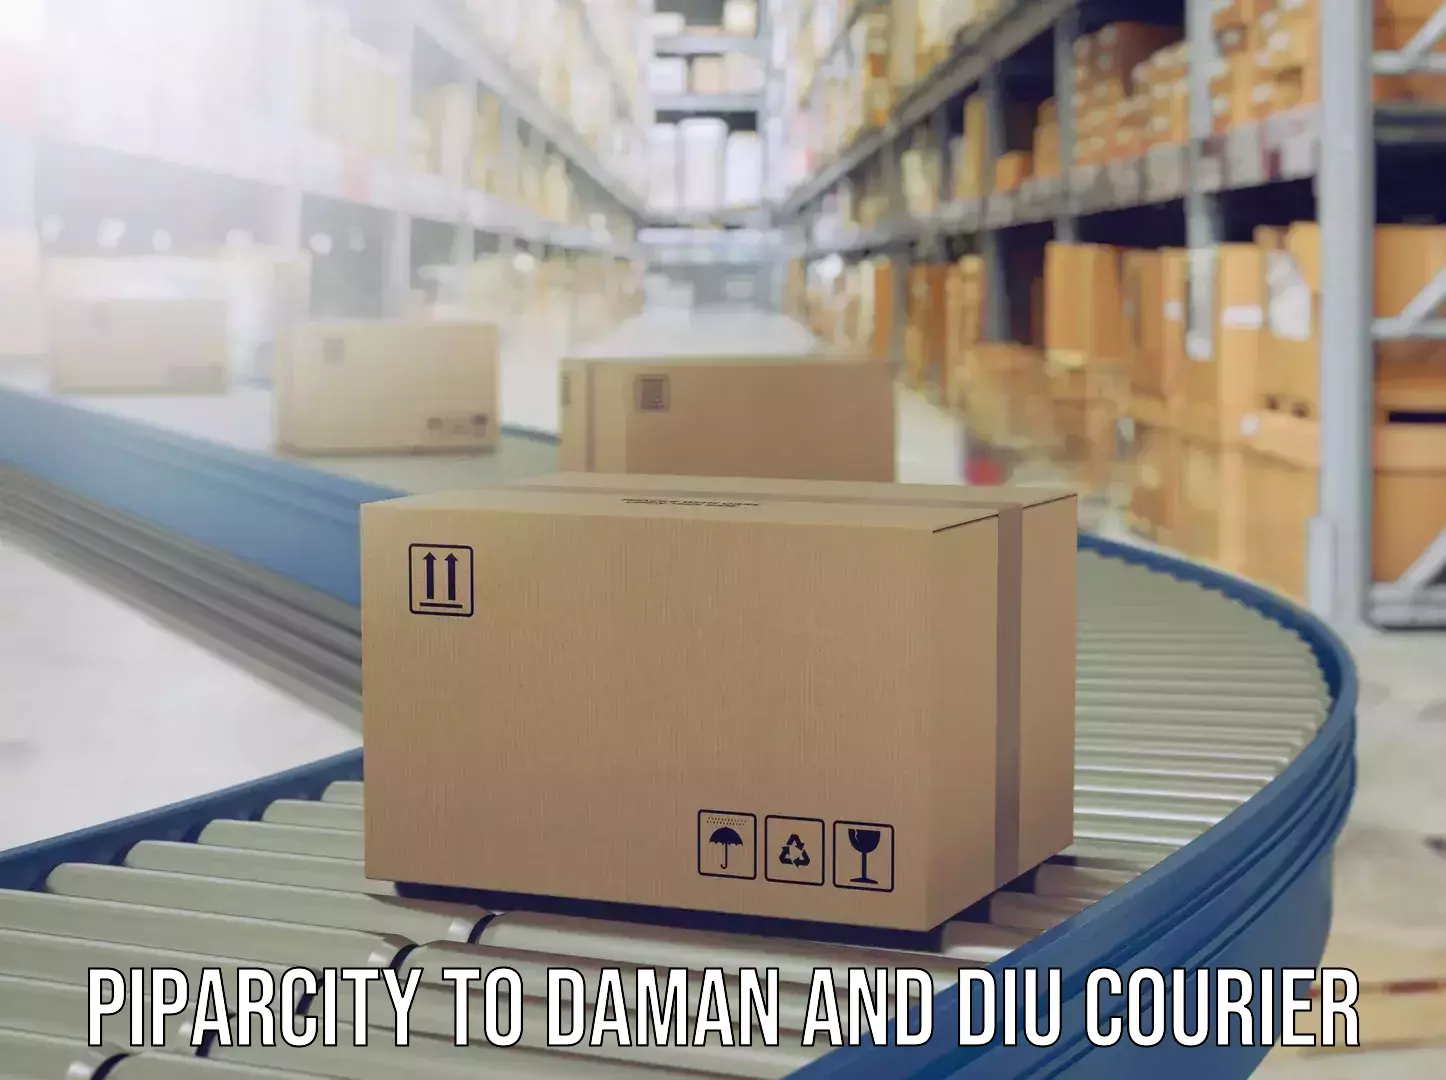 Baggage shipping schedule Piparcity to Daman and Diu